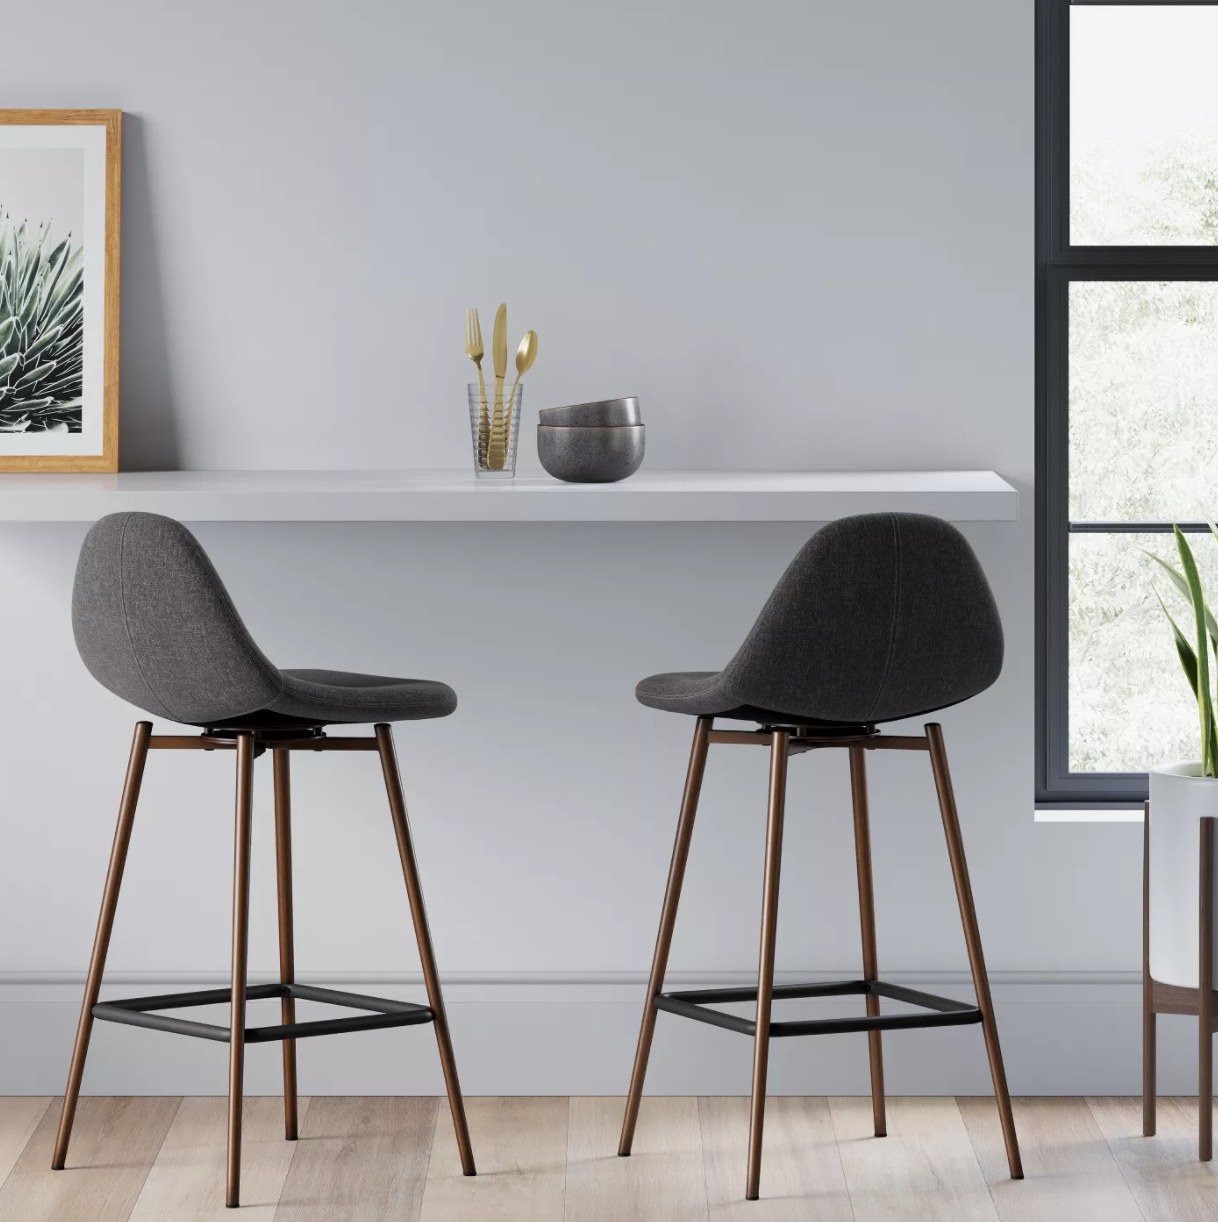 grey upholstered stools with wooden legs